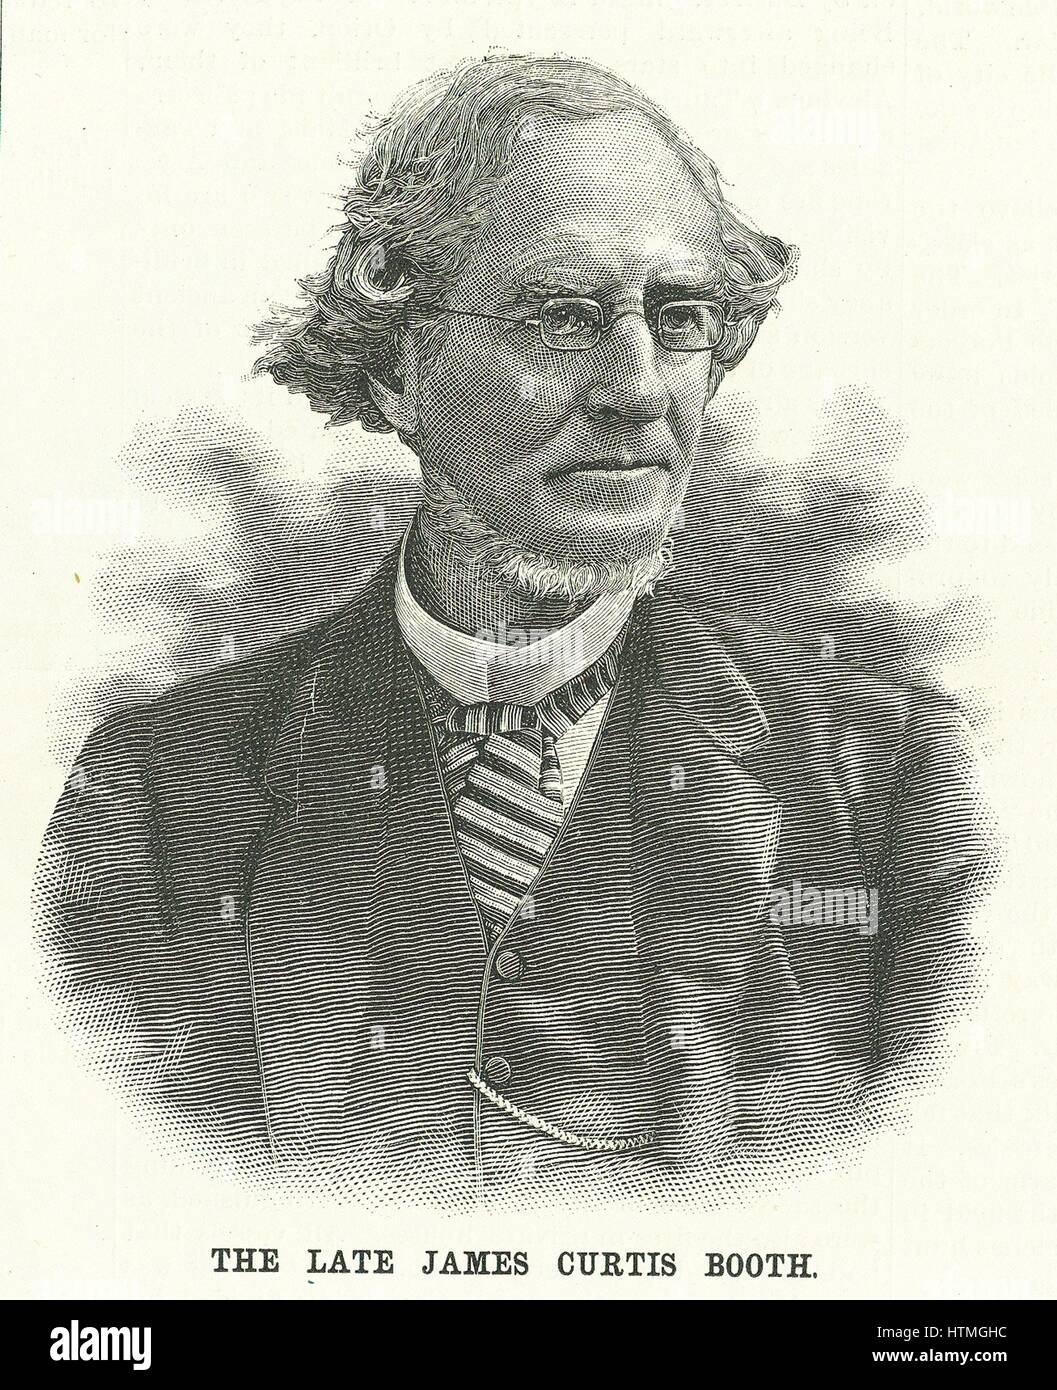 James Curtis Booth (1810-1888) American chemist, born in Philadelphia. The first state geologist for Delaware. Smelter and refiner to the US Mint (1849-1888). Engraving from 'Scientific American' (New York, 9 June 1888). Stock Photo